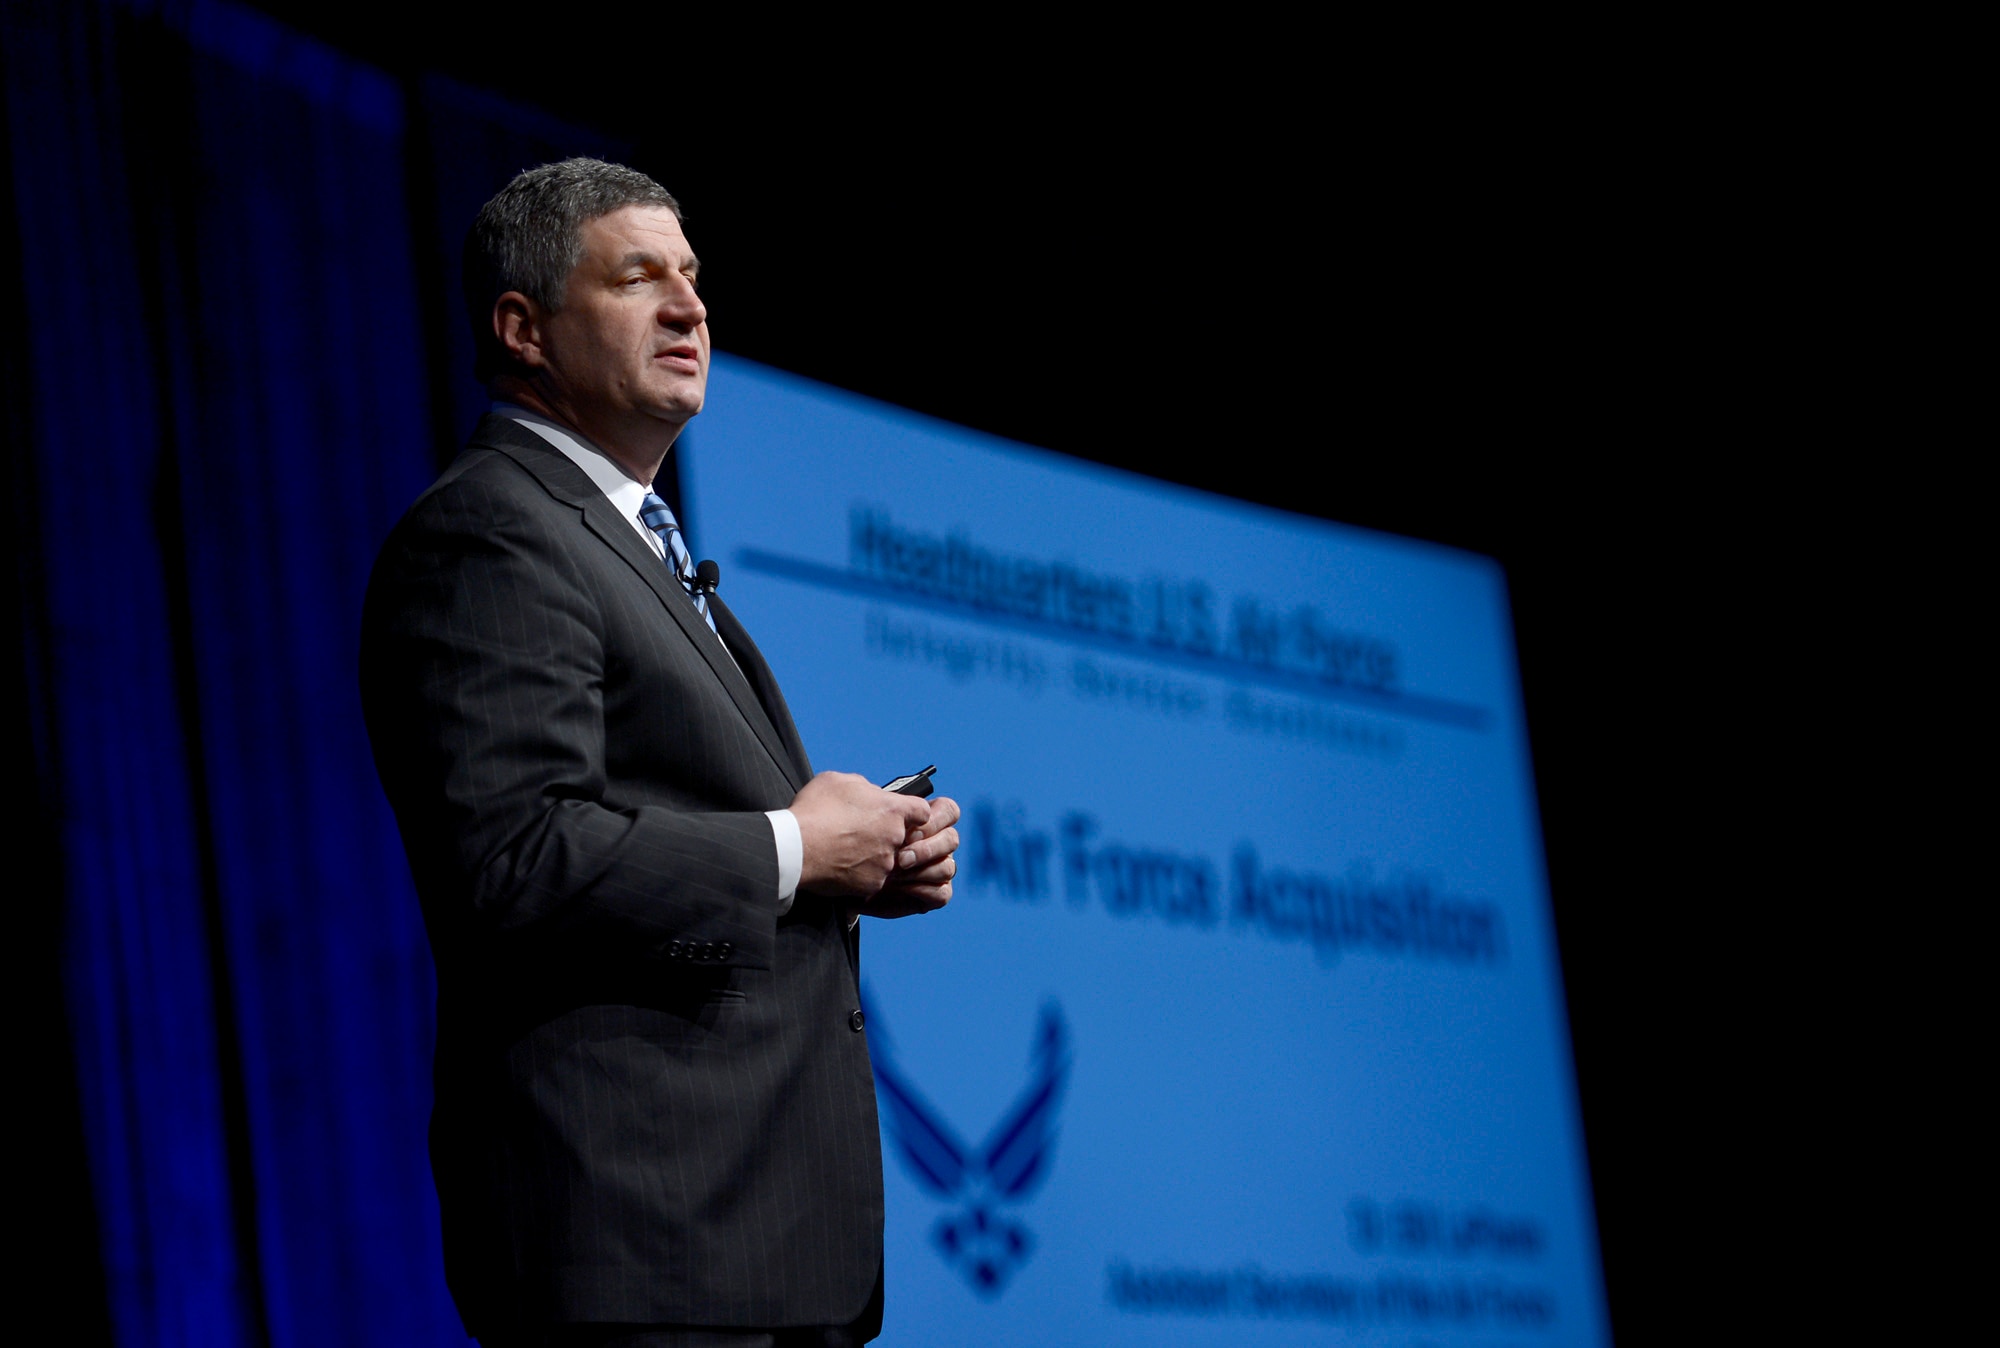 Dr. William A. LaPlante talks to attendees of the Air Force Association’s Annual Air Warfare Symposium and Technology Exposition Feb. 13, 2015, in Orlando, Fla. LaPante is the assistant secretary of the Air Force for Acquisition. He spoke about Air Force procurement strategy and challenges. (U.S. Air Force photo/Scott M. Ash)